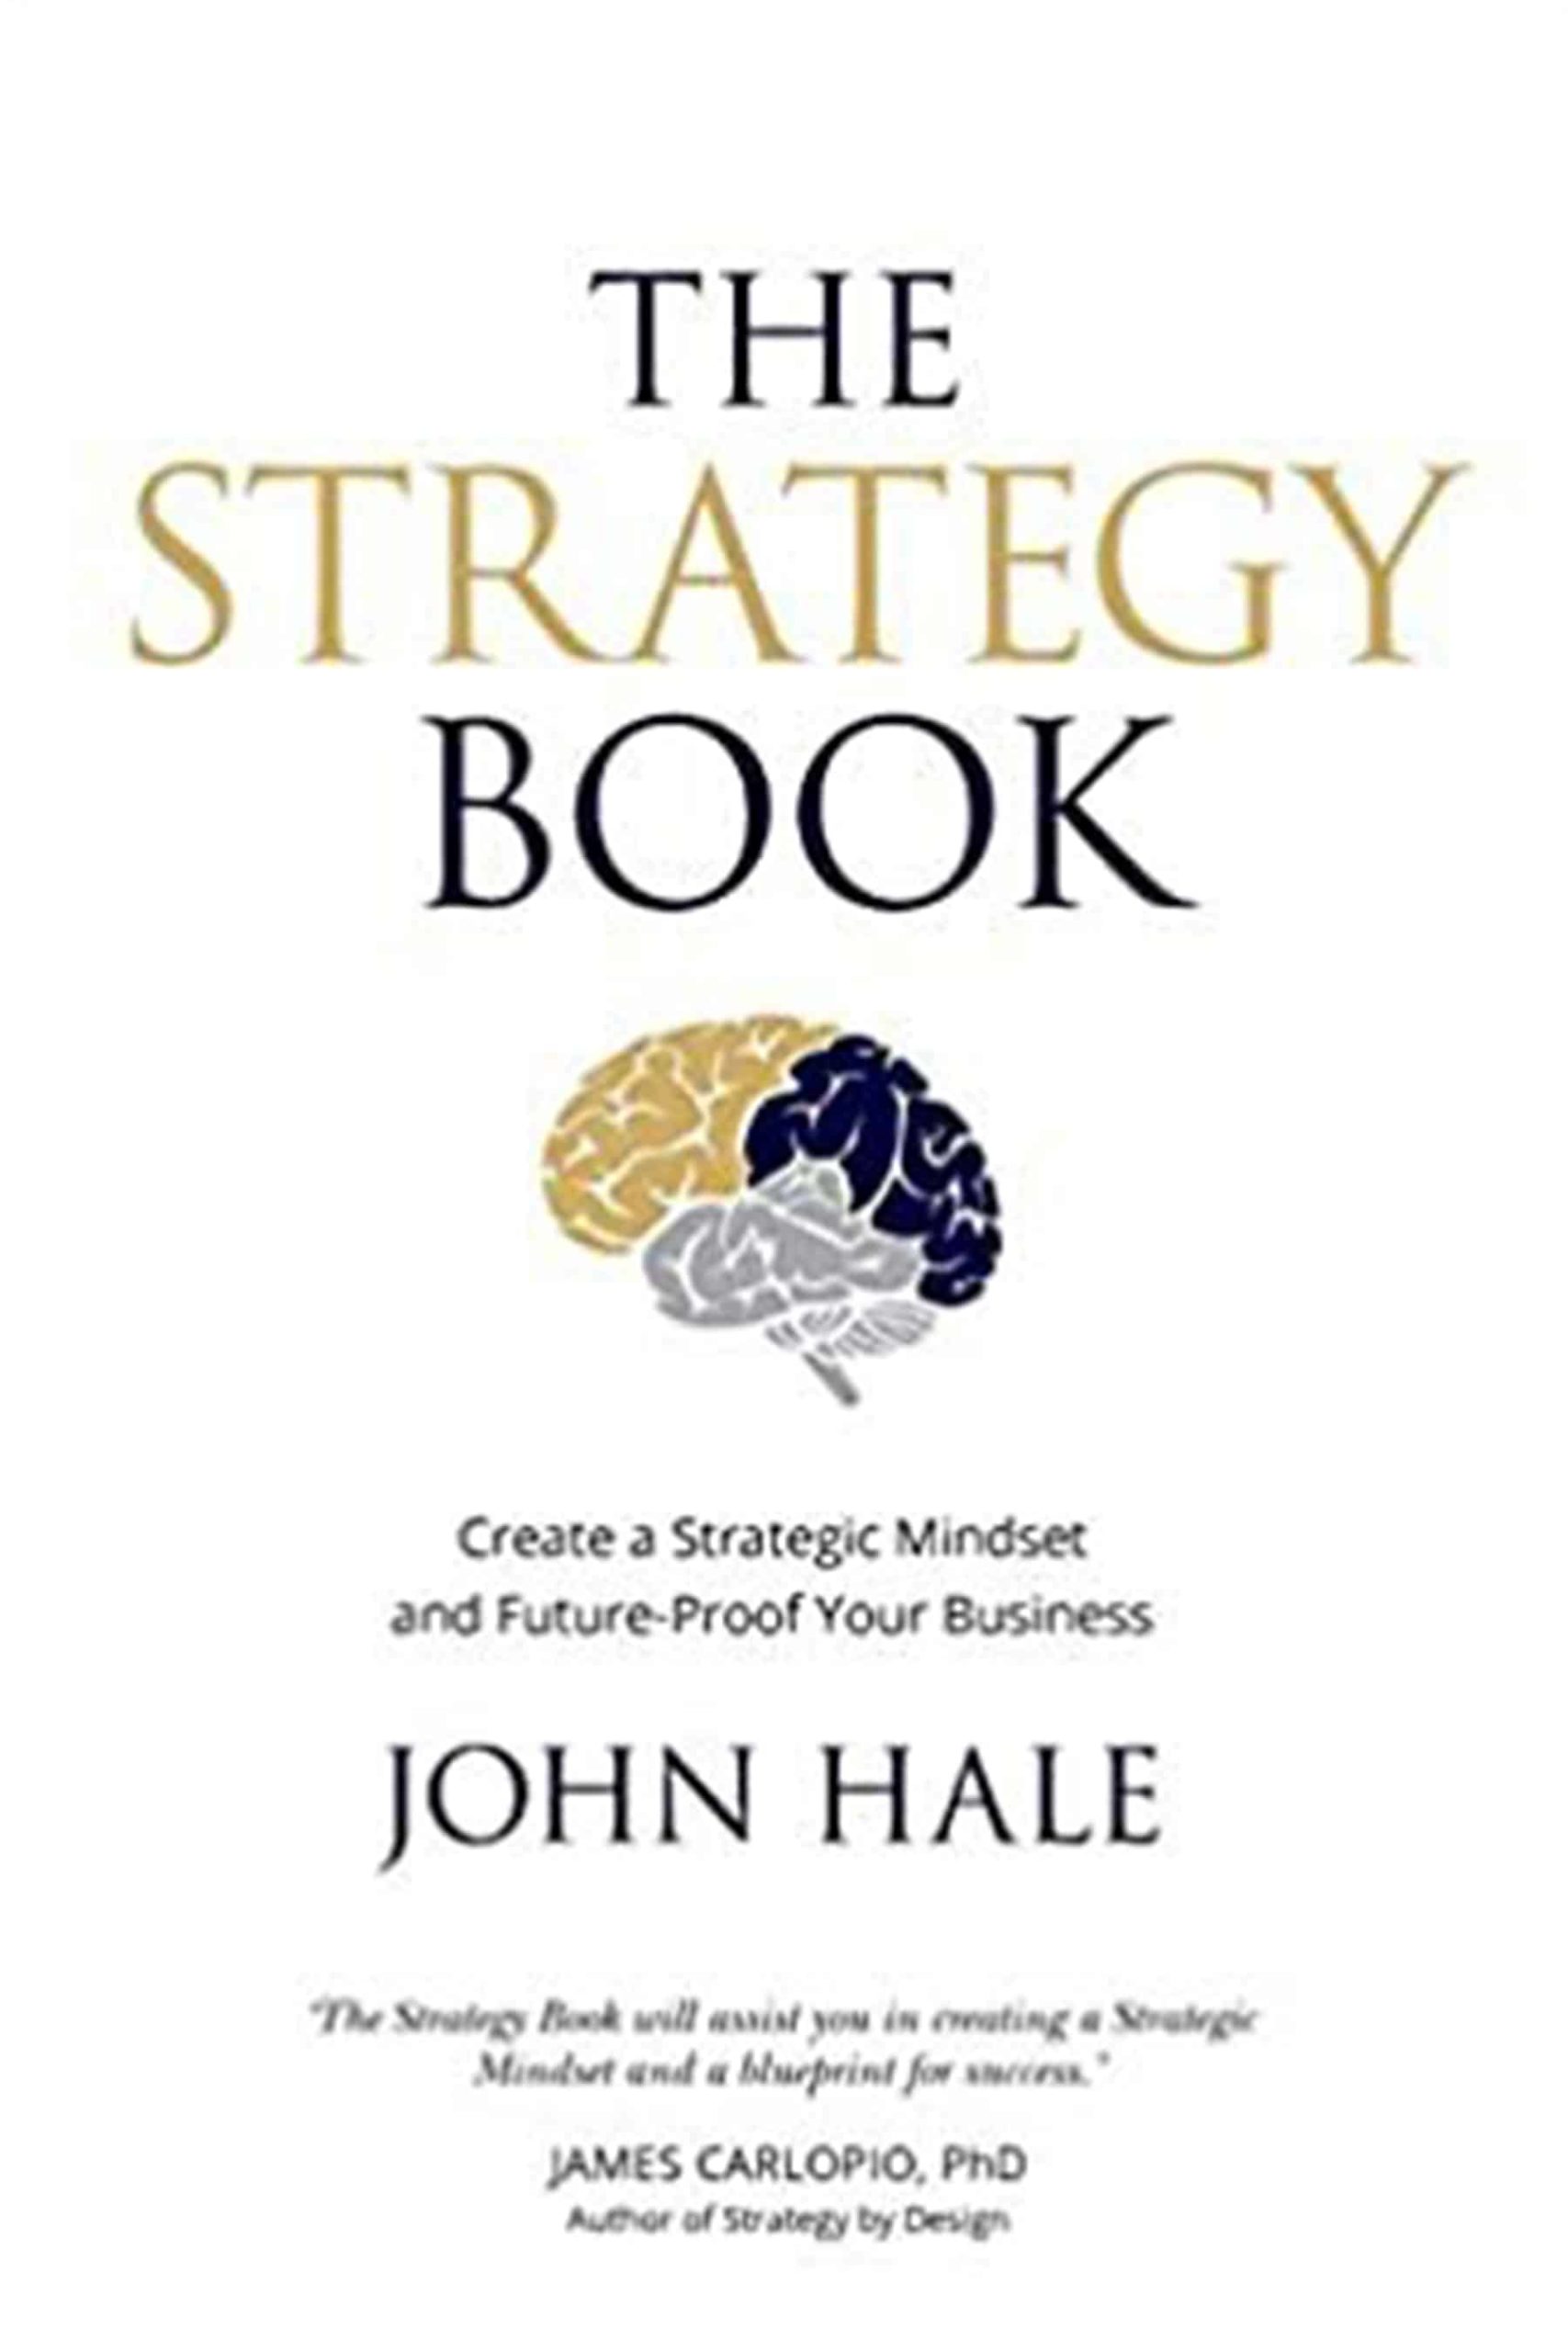 The Strategy Book: Create a Strategic Mindset and Future-Proof Your Business